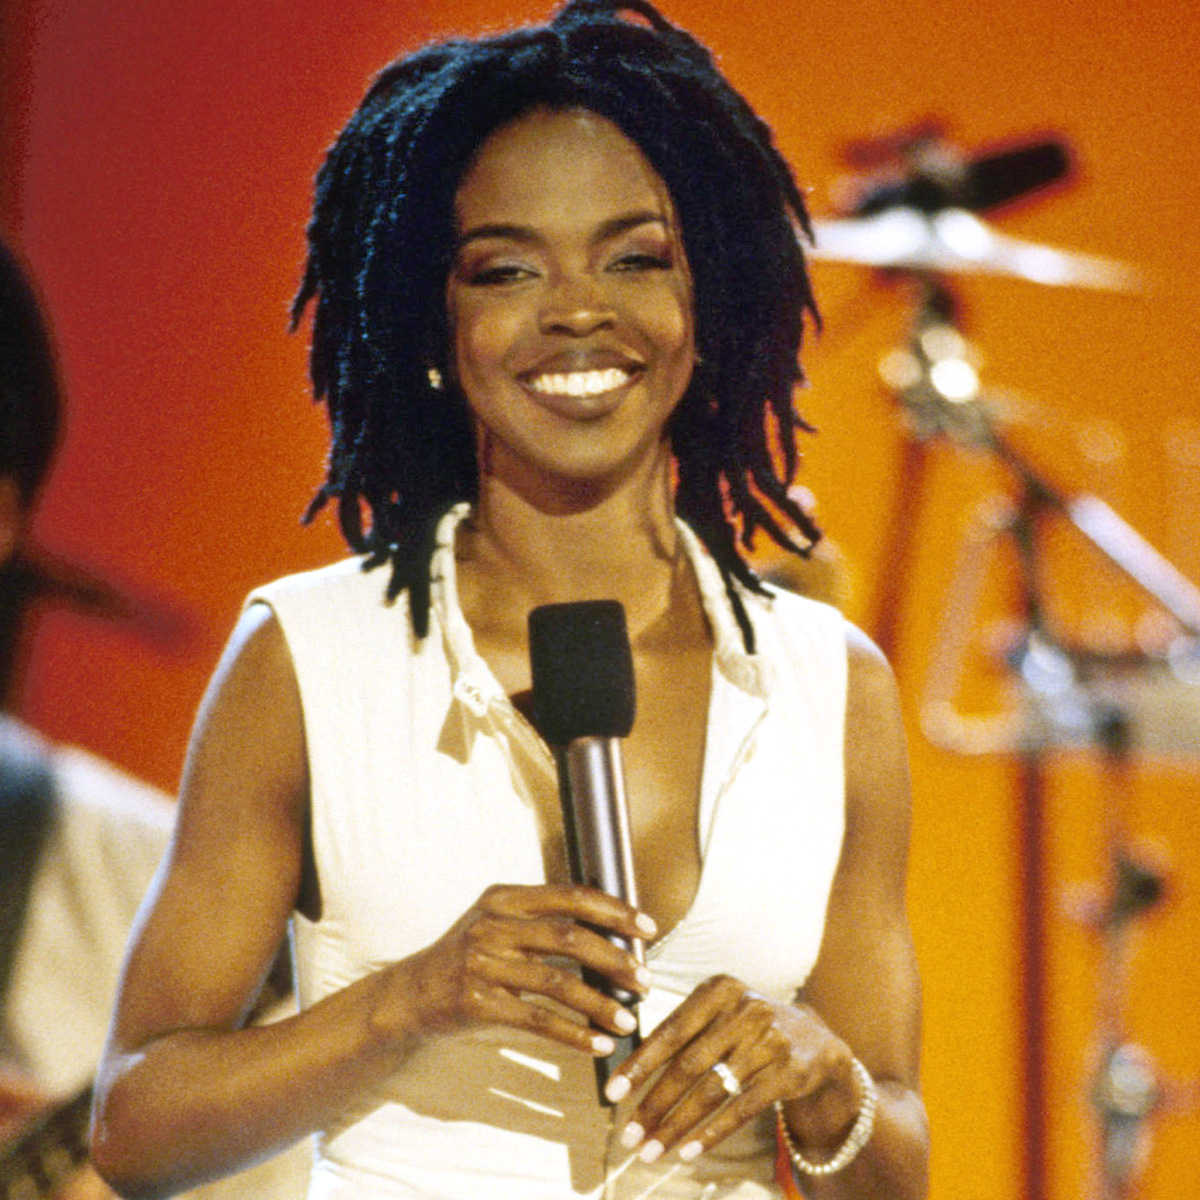 Why Lauryn Hill never made another album after misery